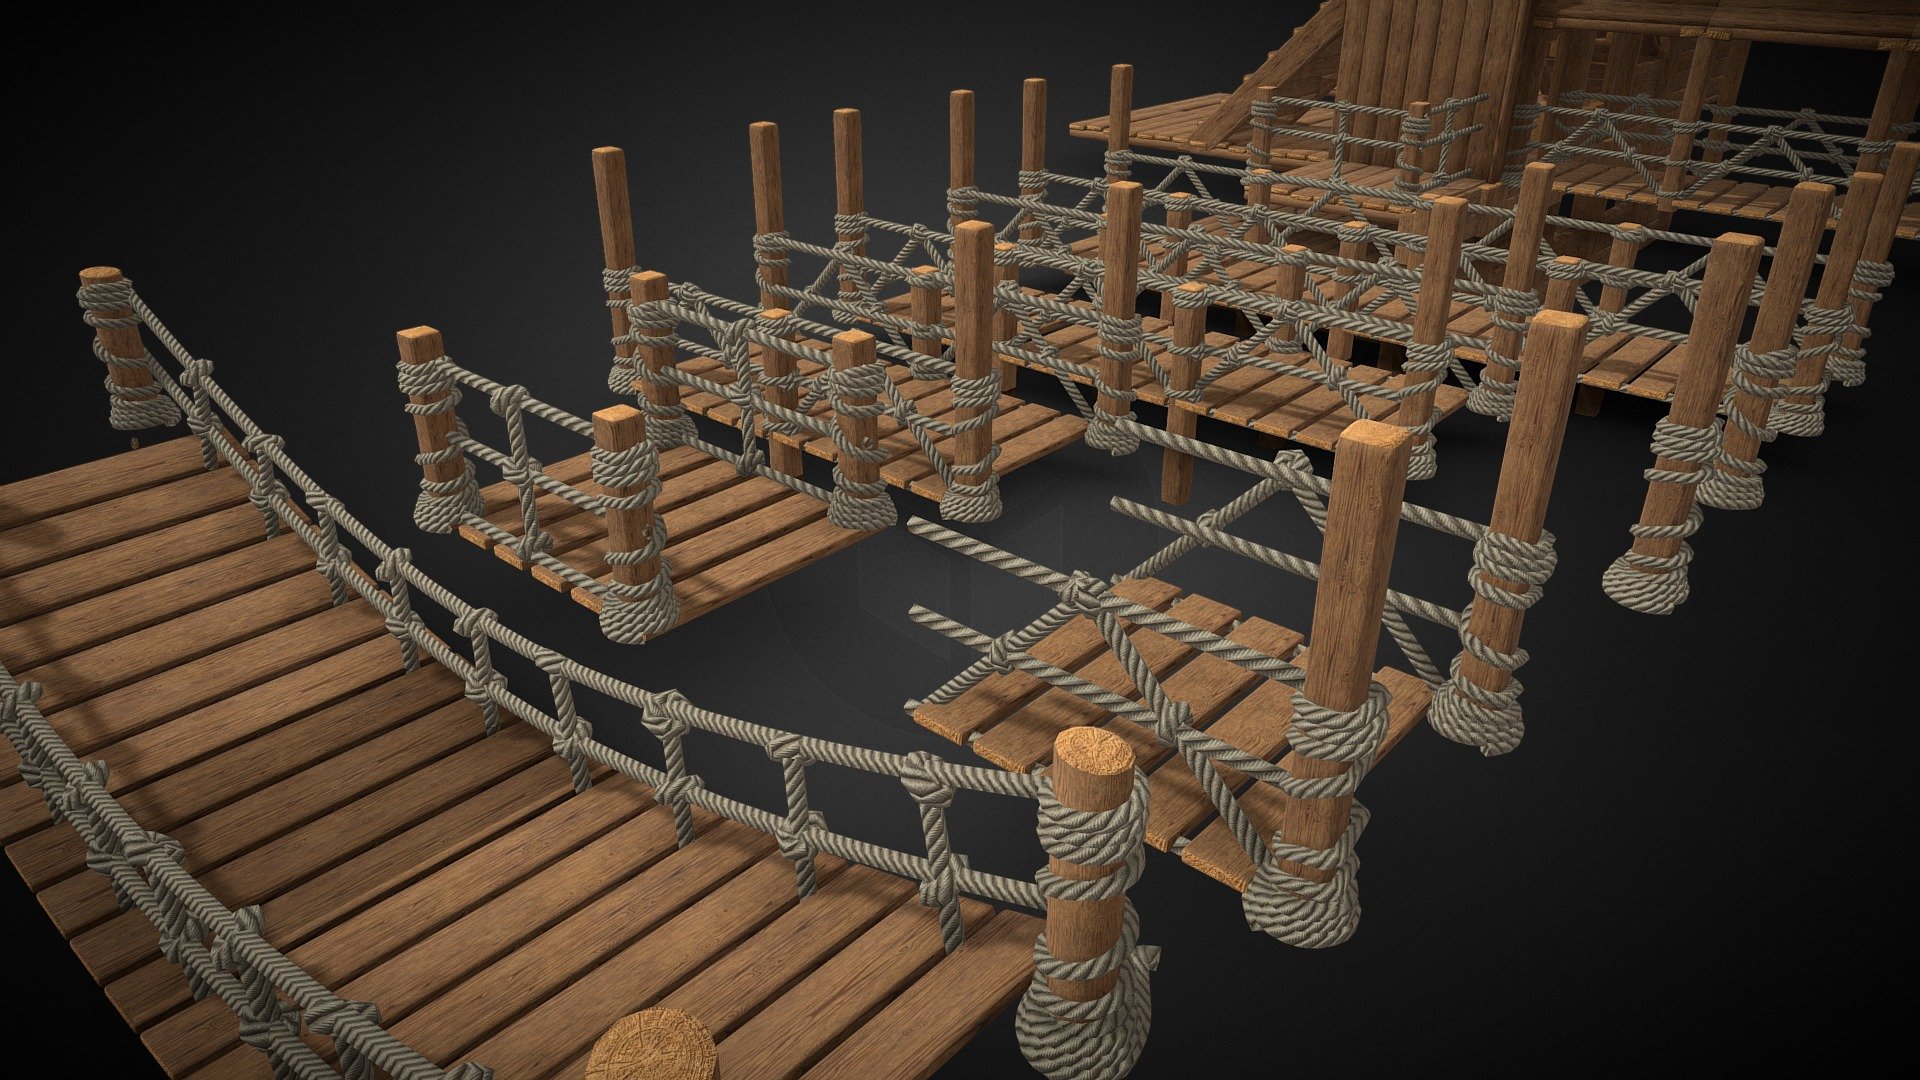 Quickly create a clean and stylized adventure game, tree house or and entire creative mode within a game with this stylized and easy to use kit. All models utilize one optimized texture set with detailed, clean and low poly geometry.

This kit includes wooden and rope elements including; walls, floors, ceilings, roofs, railings, stairs, ladders, beams, bridges and more&hellip;

If you have any questions about this kit feel free to reach out to me - Modular Wooden Fort Pack [30+ Components] - Buy Royalty Free 3D model by CleanCraft3D (@CleanCraft_3D) 3d model